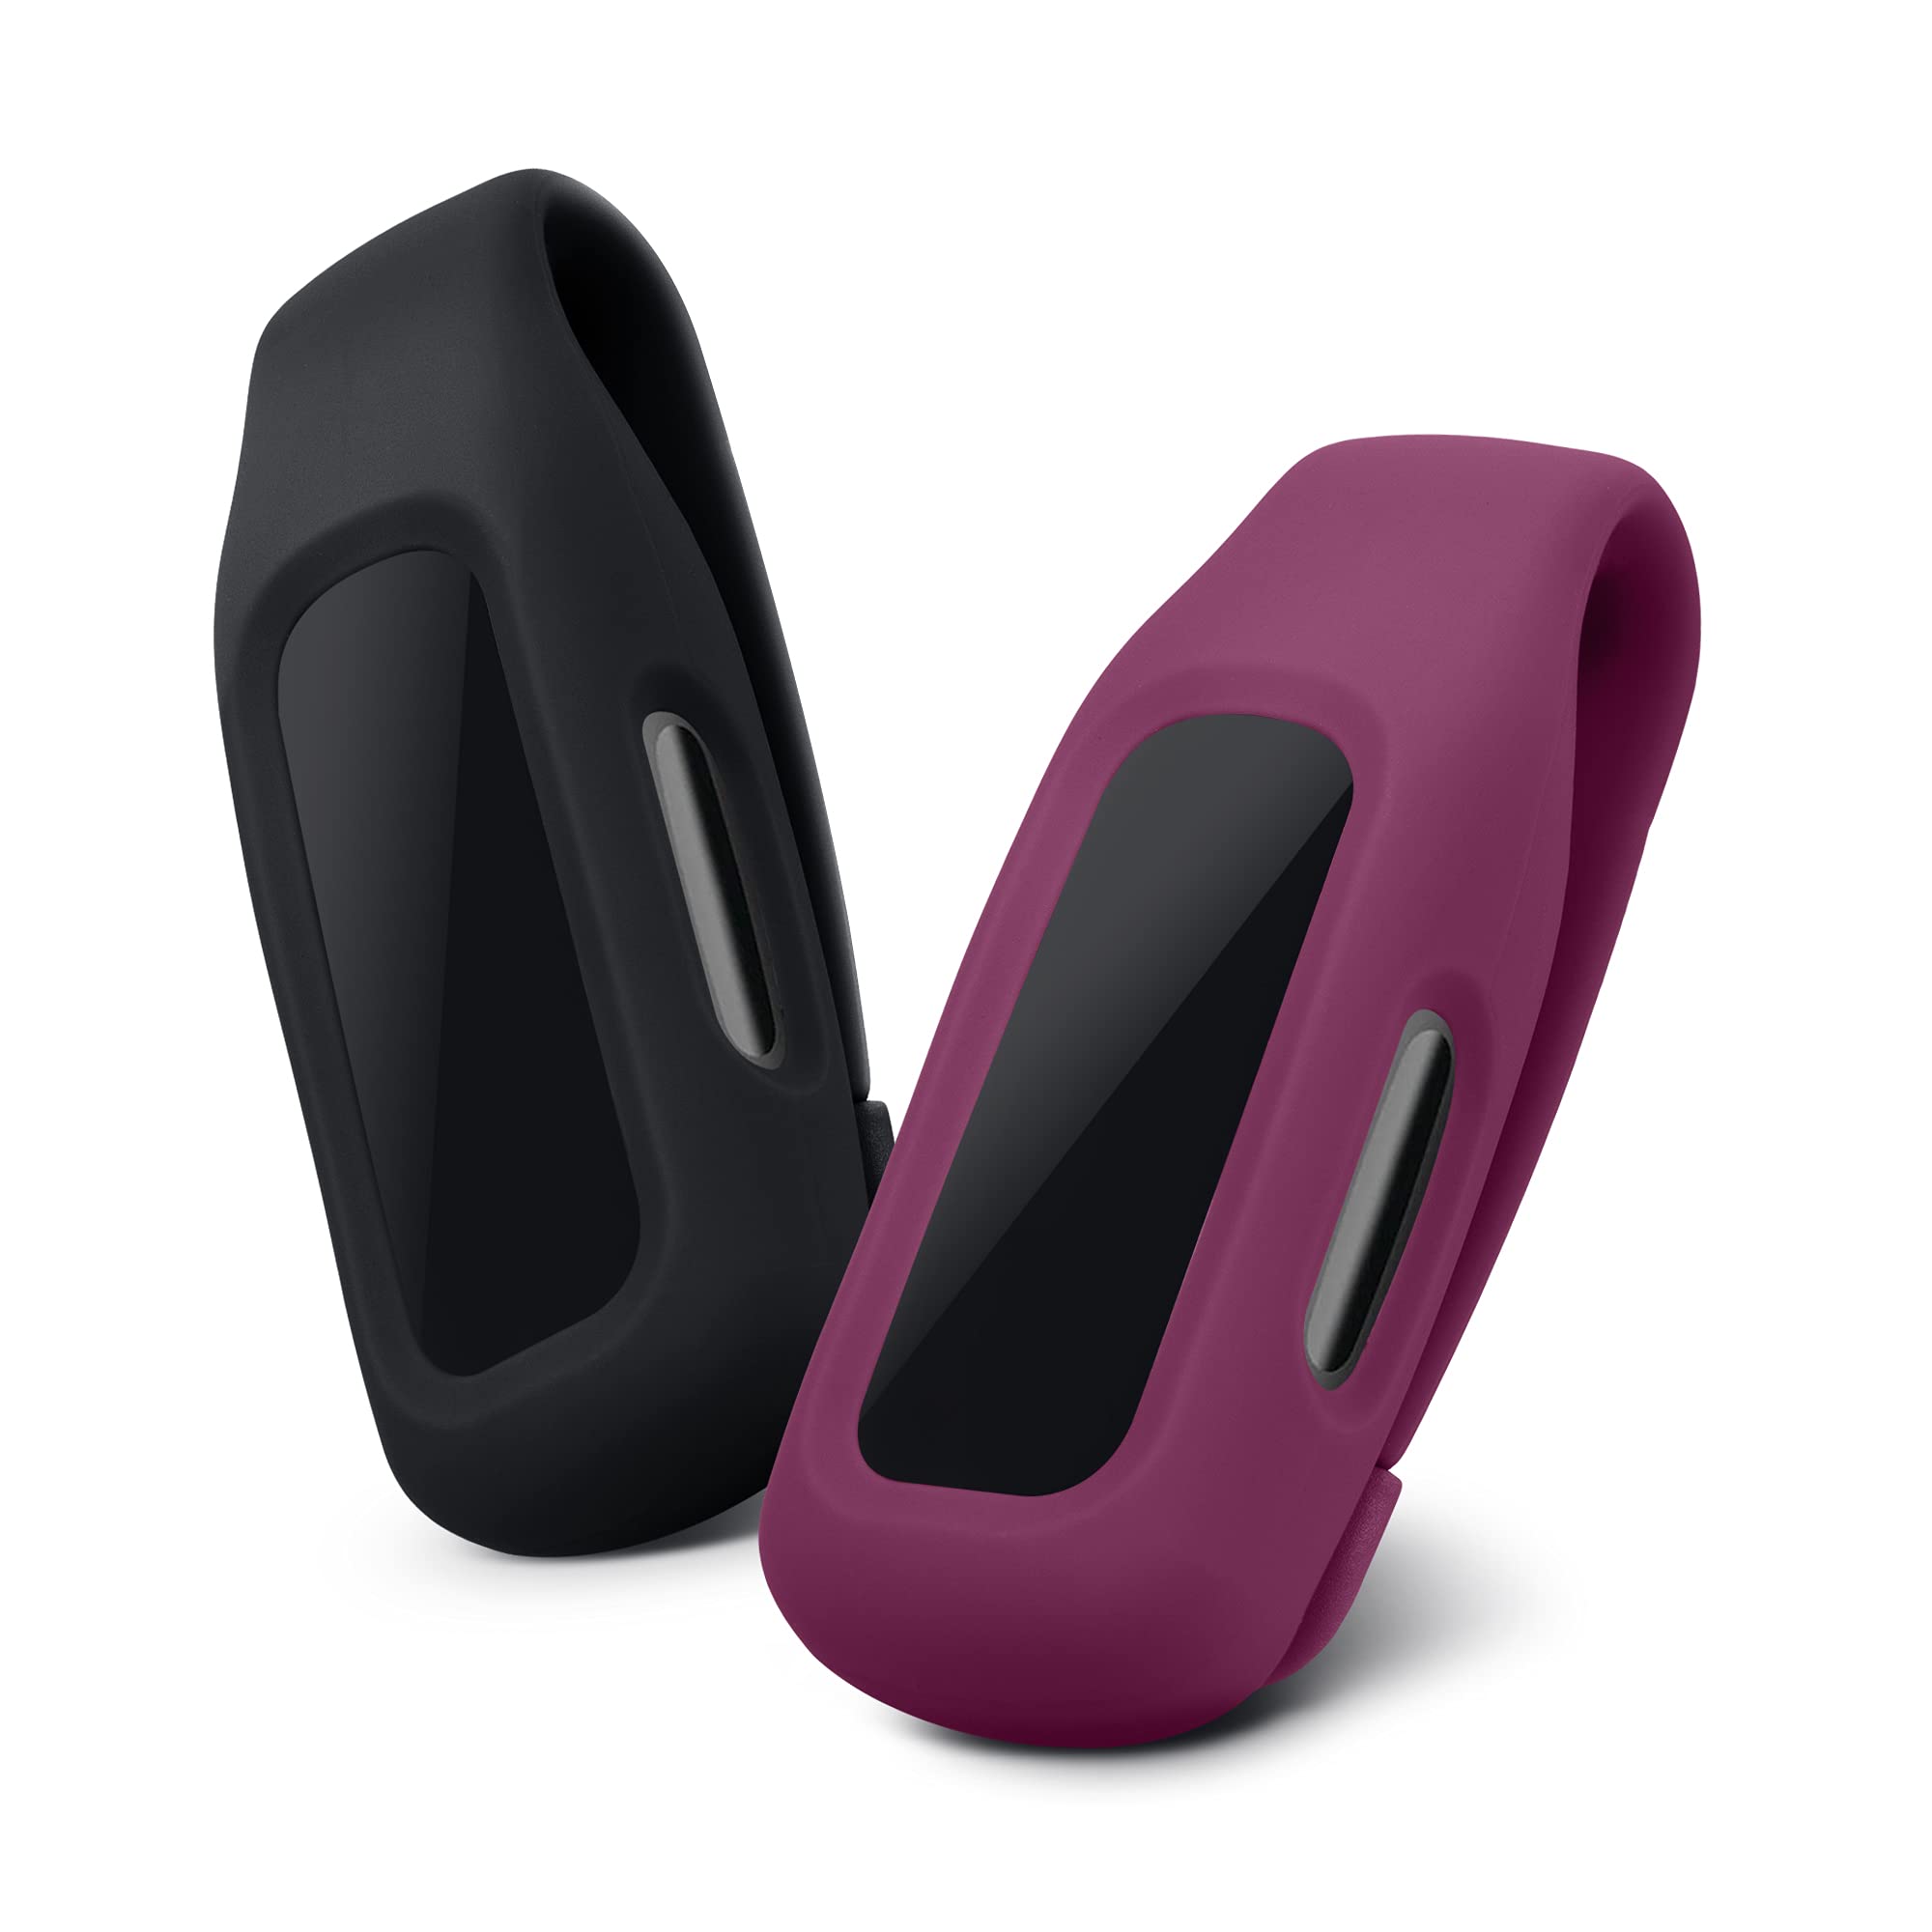 Replacement Bands For Fitbit Ace 3 / Inspire 2 Bracelet Case